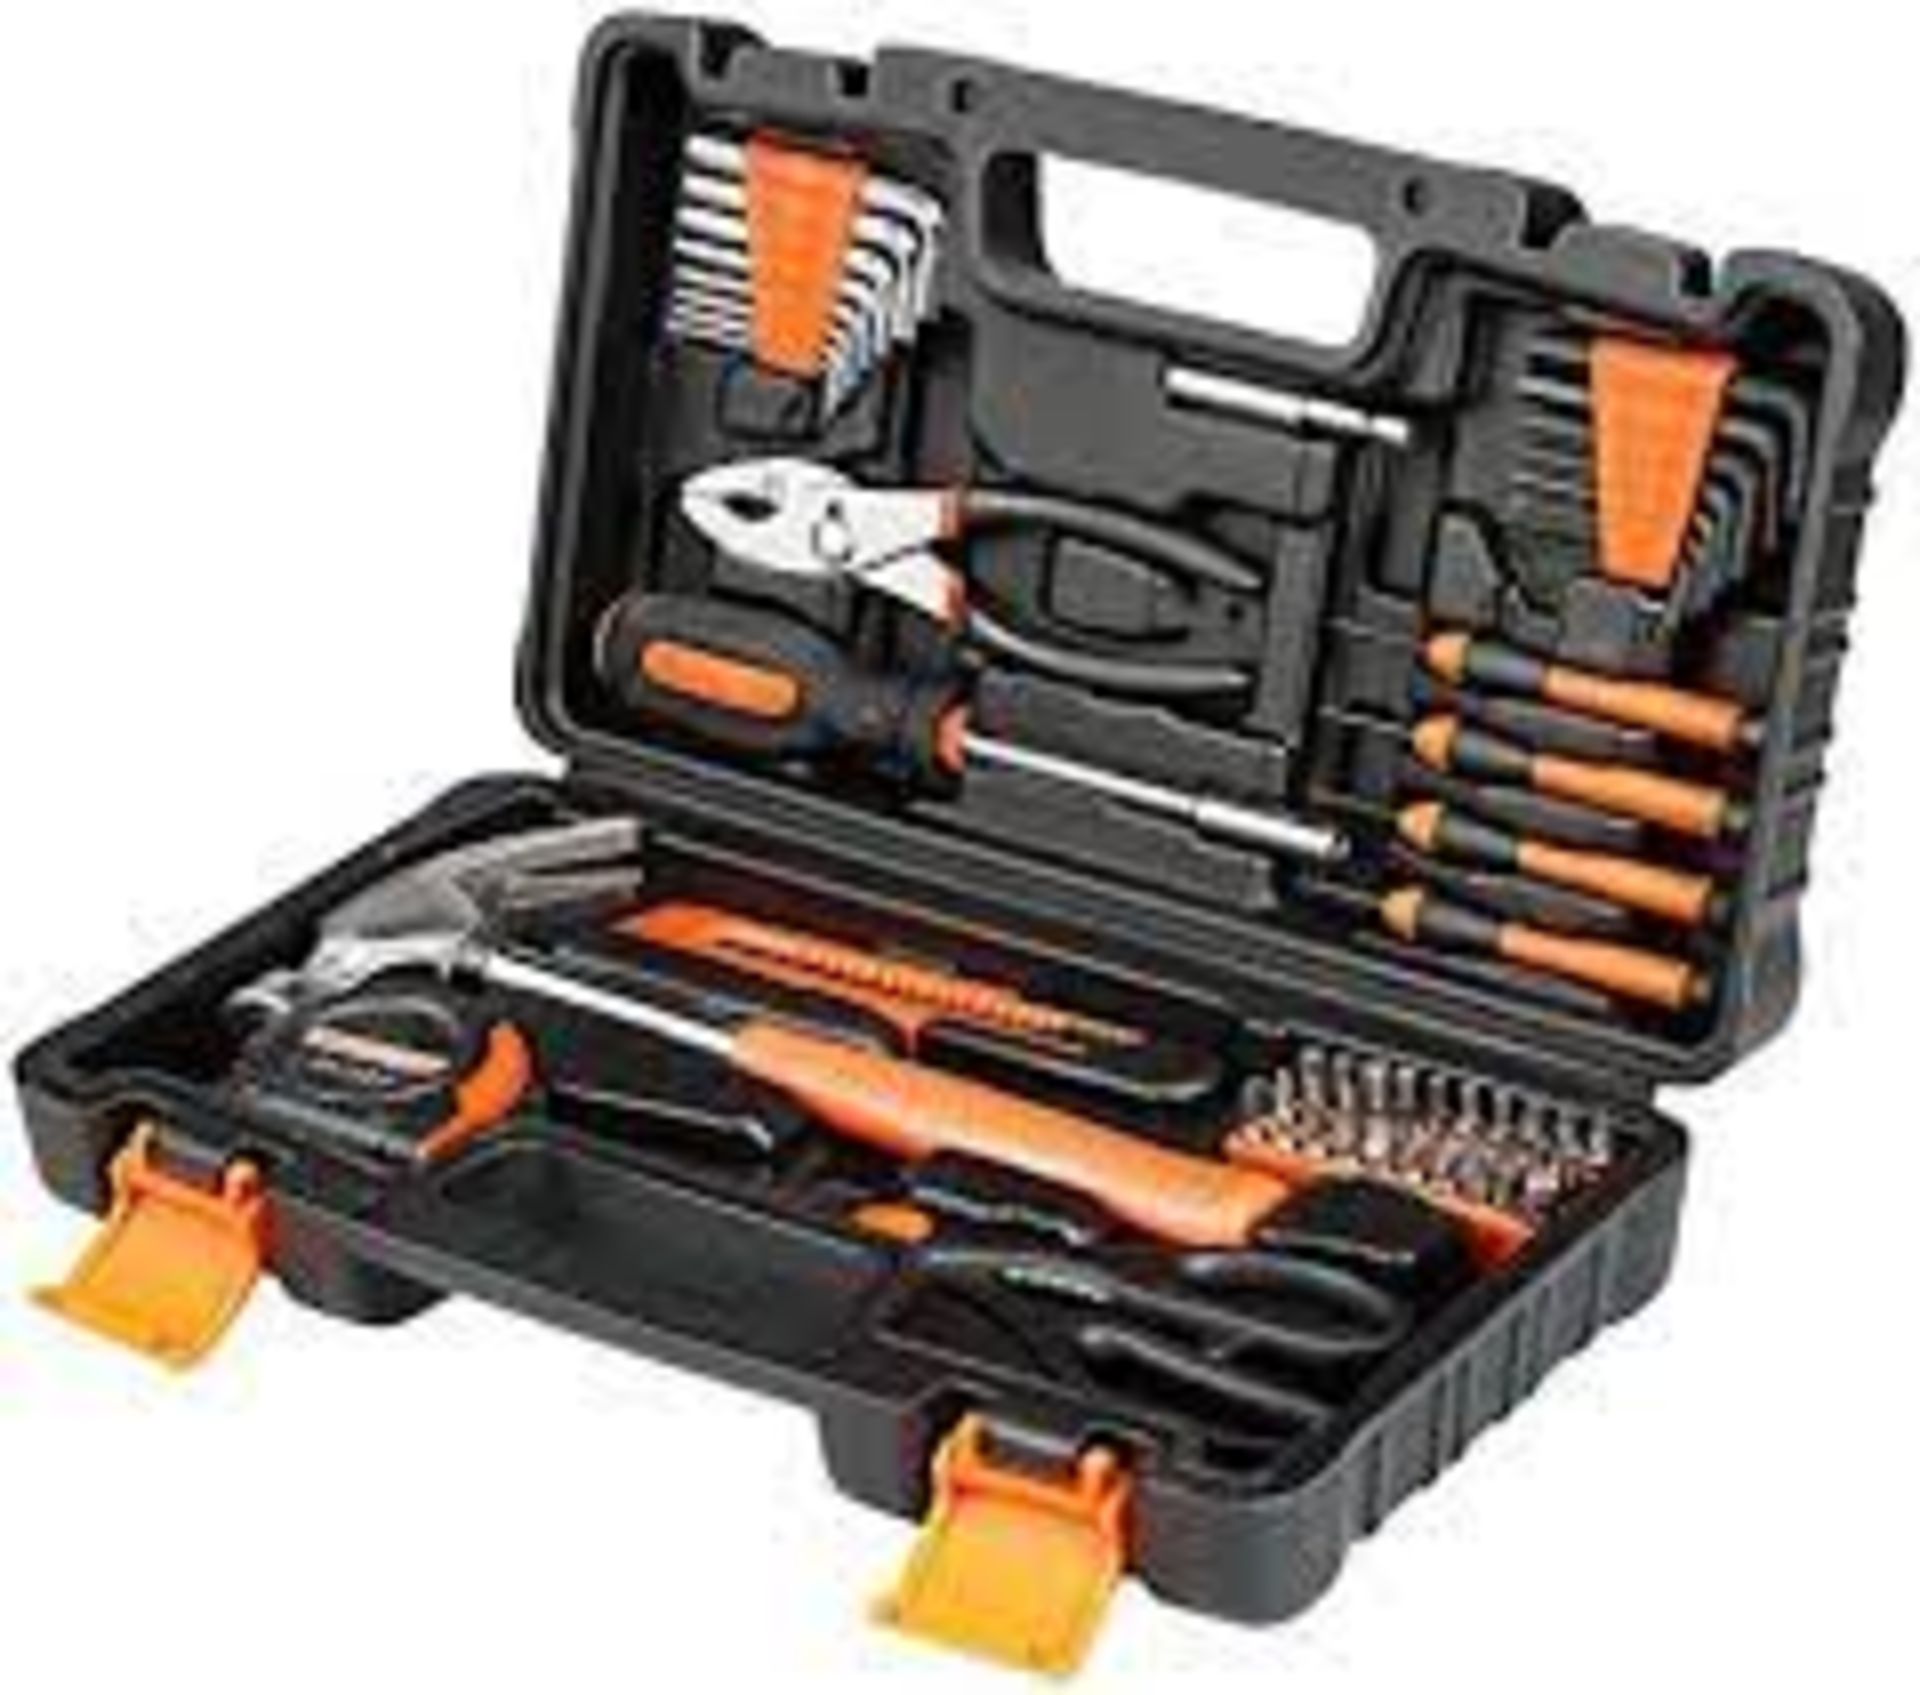 TRADE LOT 24 X NEW BOXED ENGiNDOT Home Tool Kit, 57-Piece Basic Tool kit with Storage Case. (ROW 10)